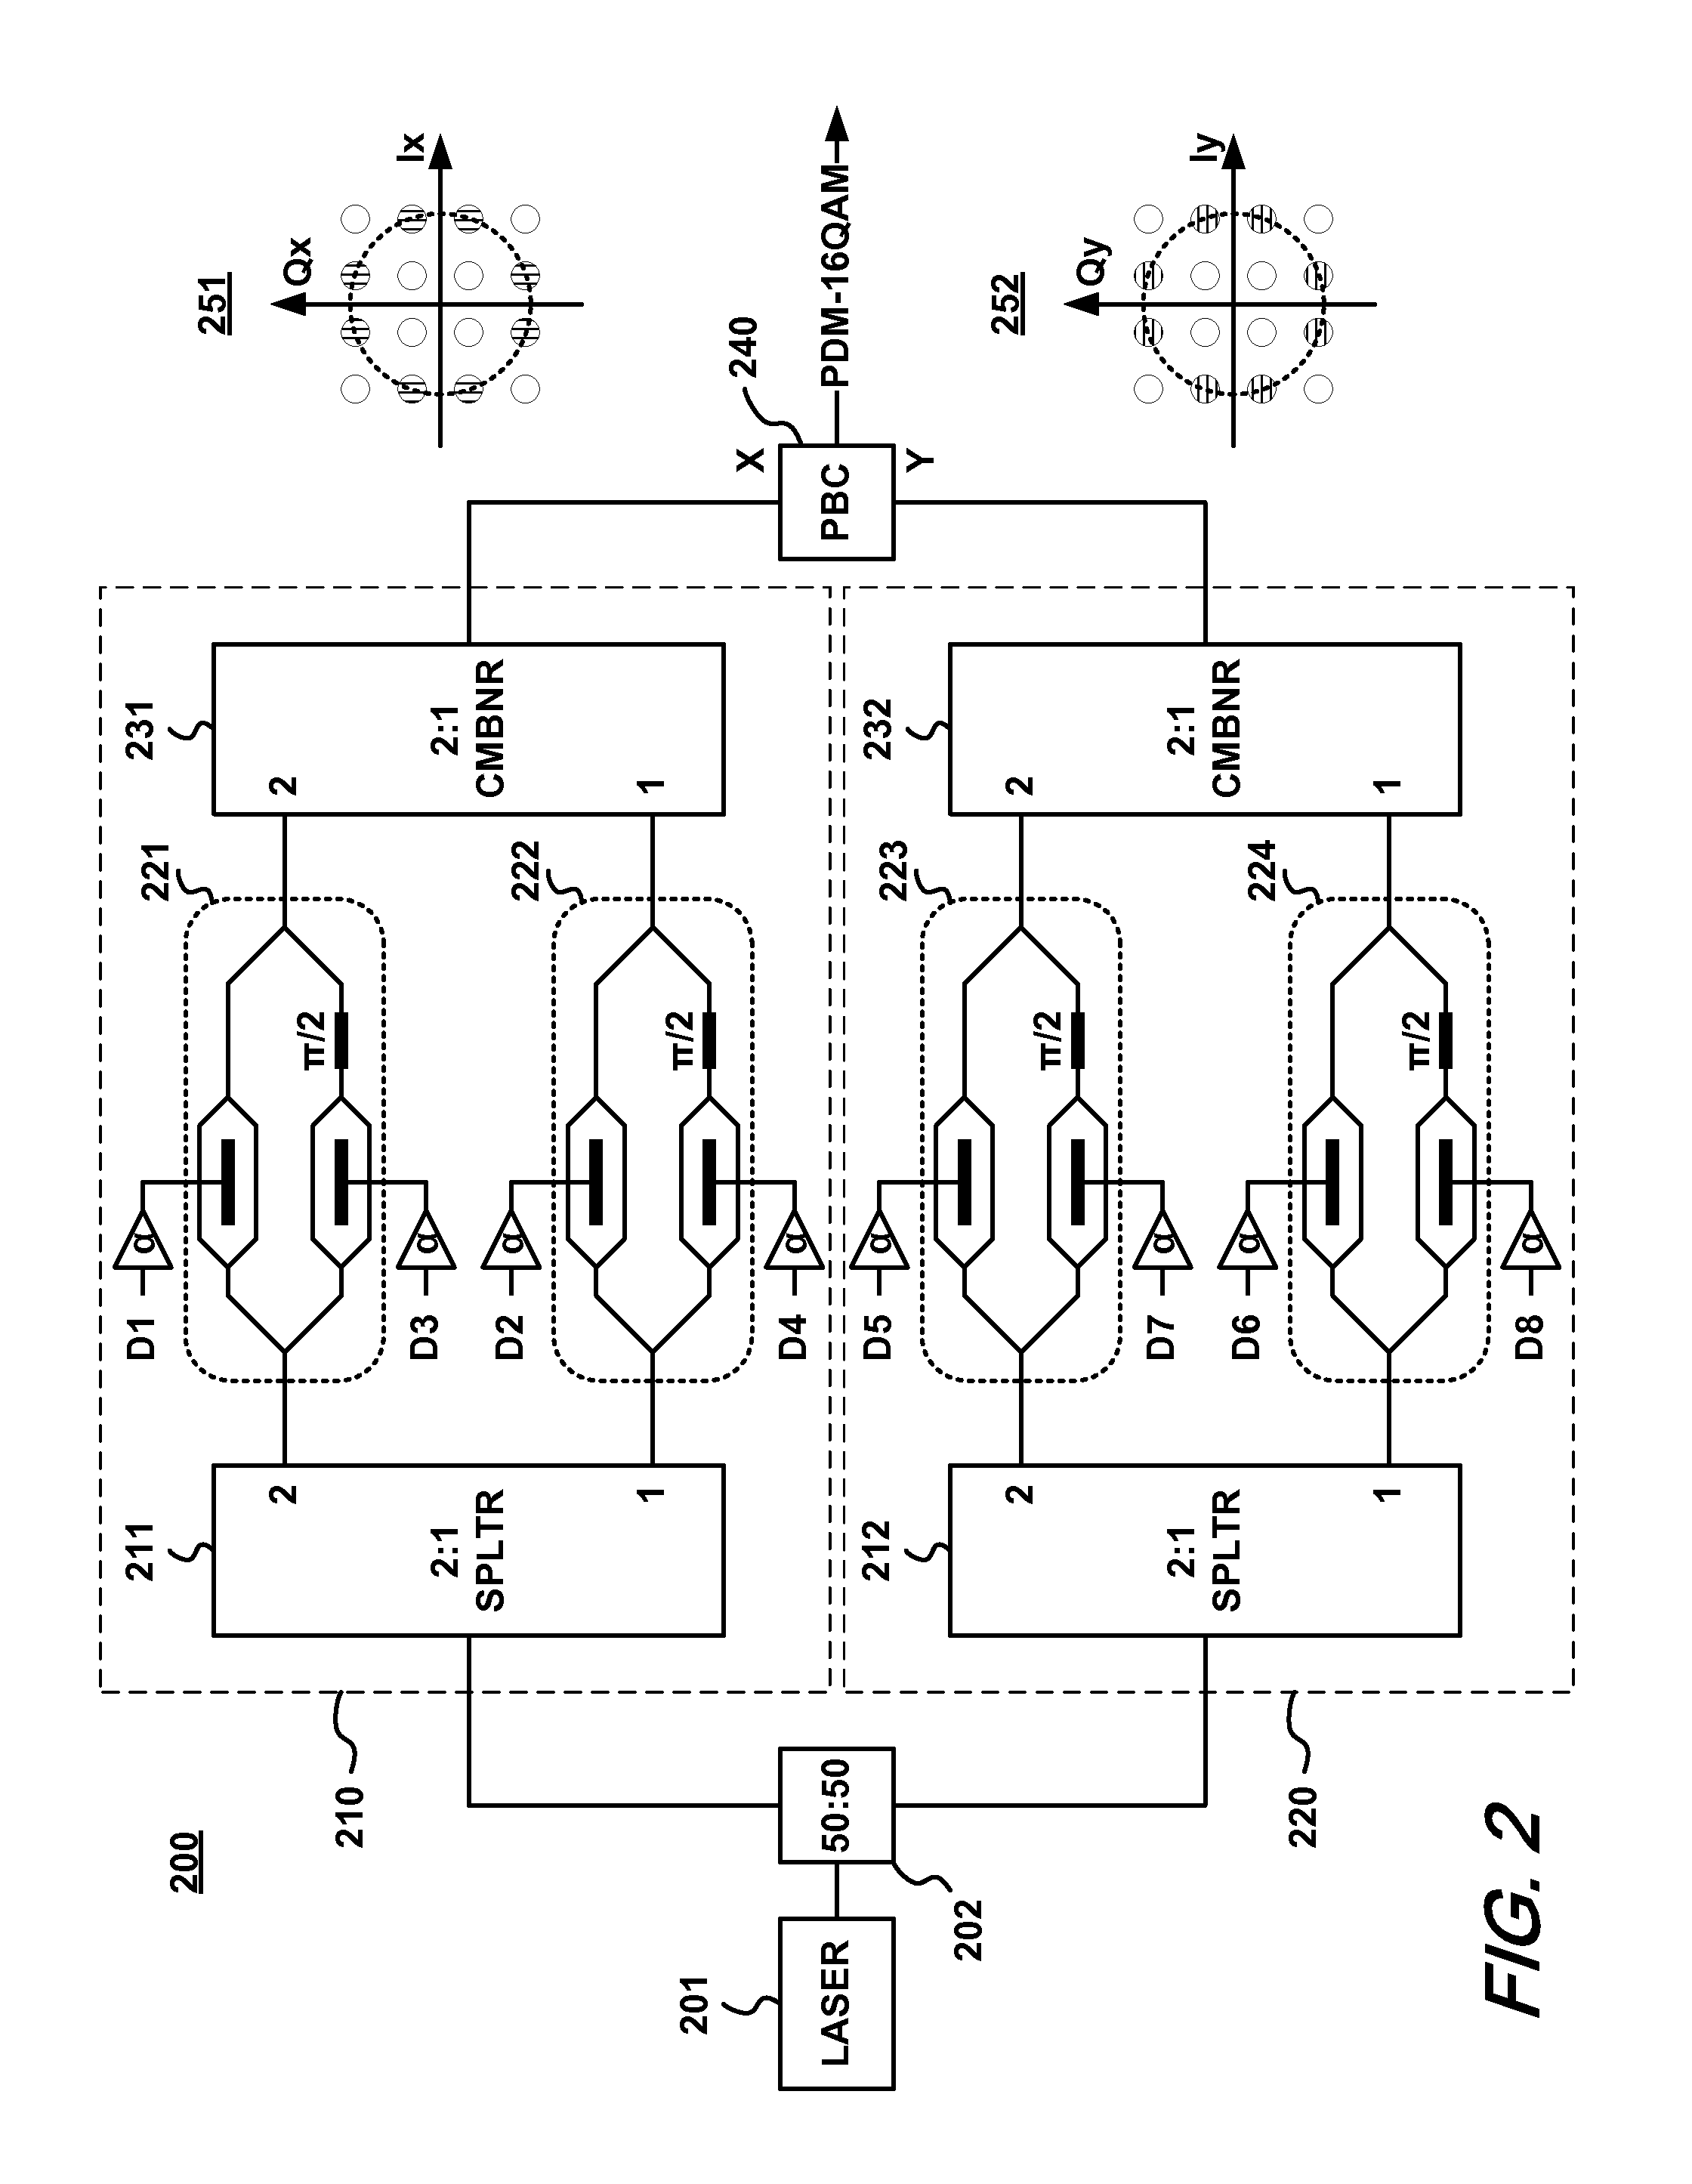 Method and apparatus for transmitting high-level qam optical signals with binary drive signals